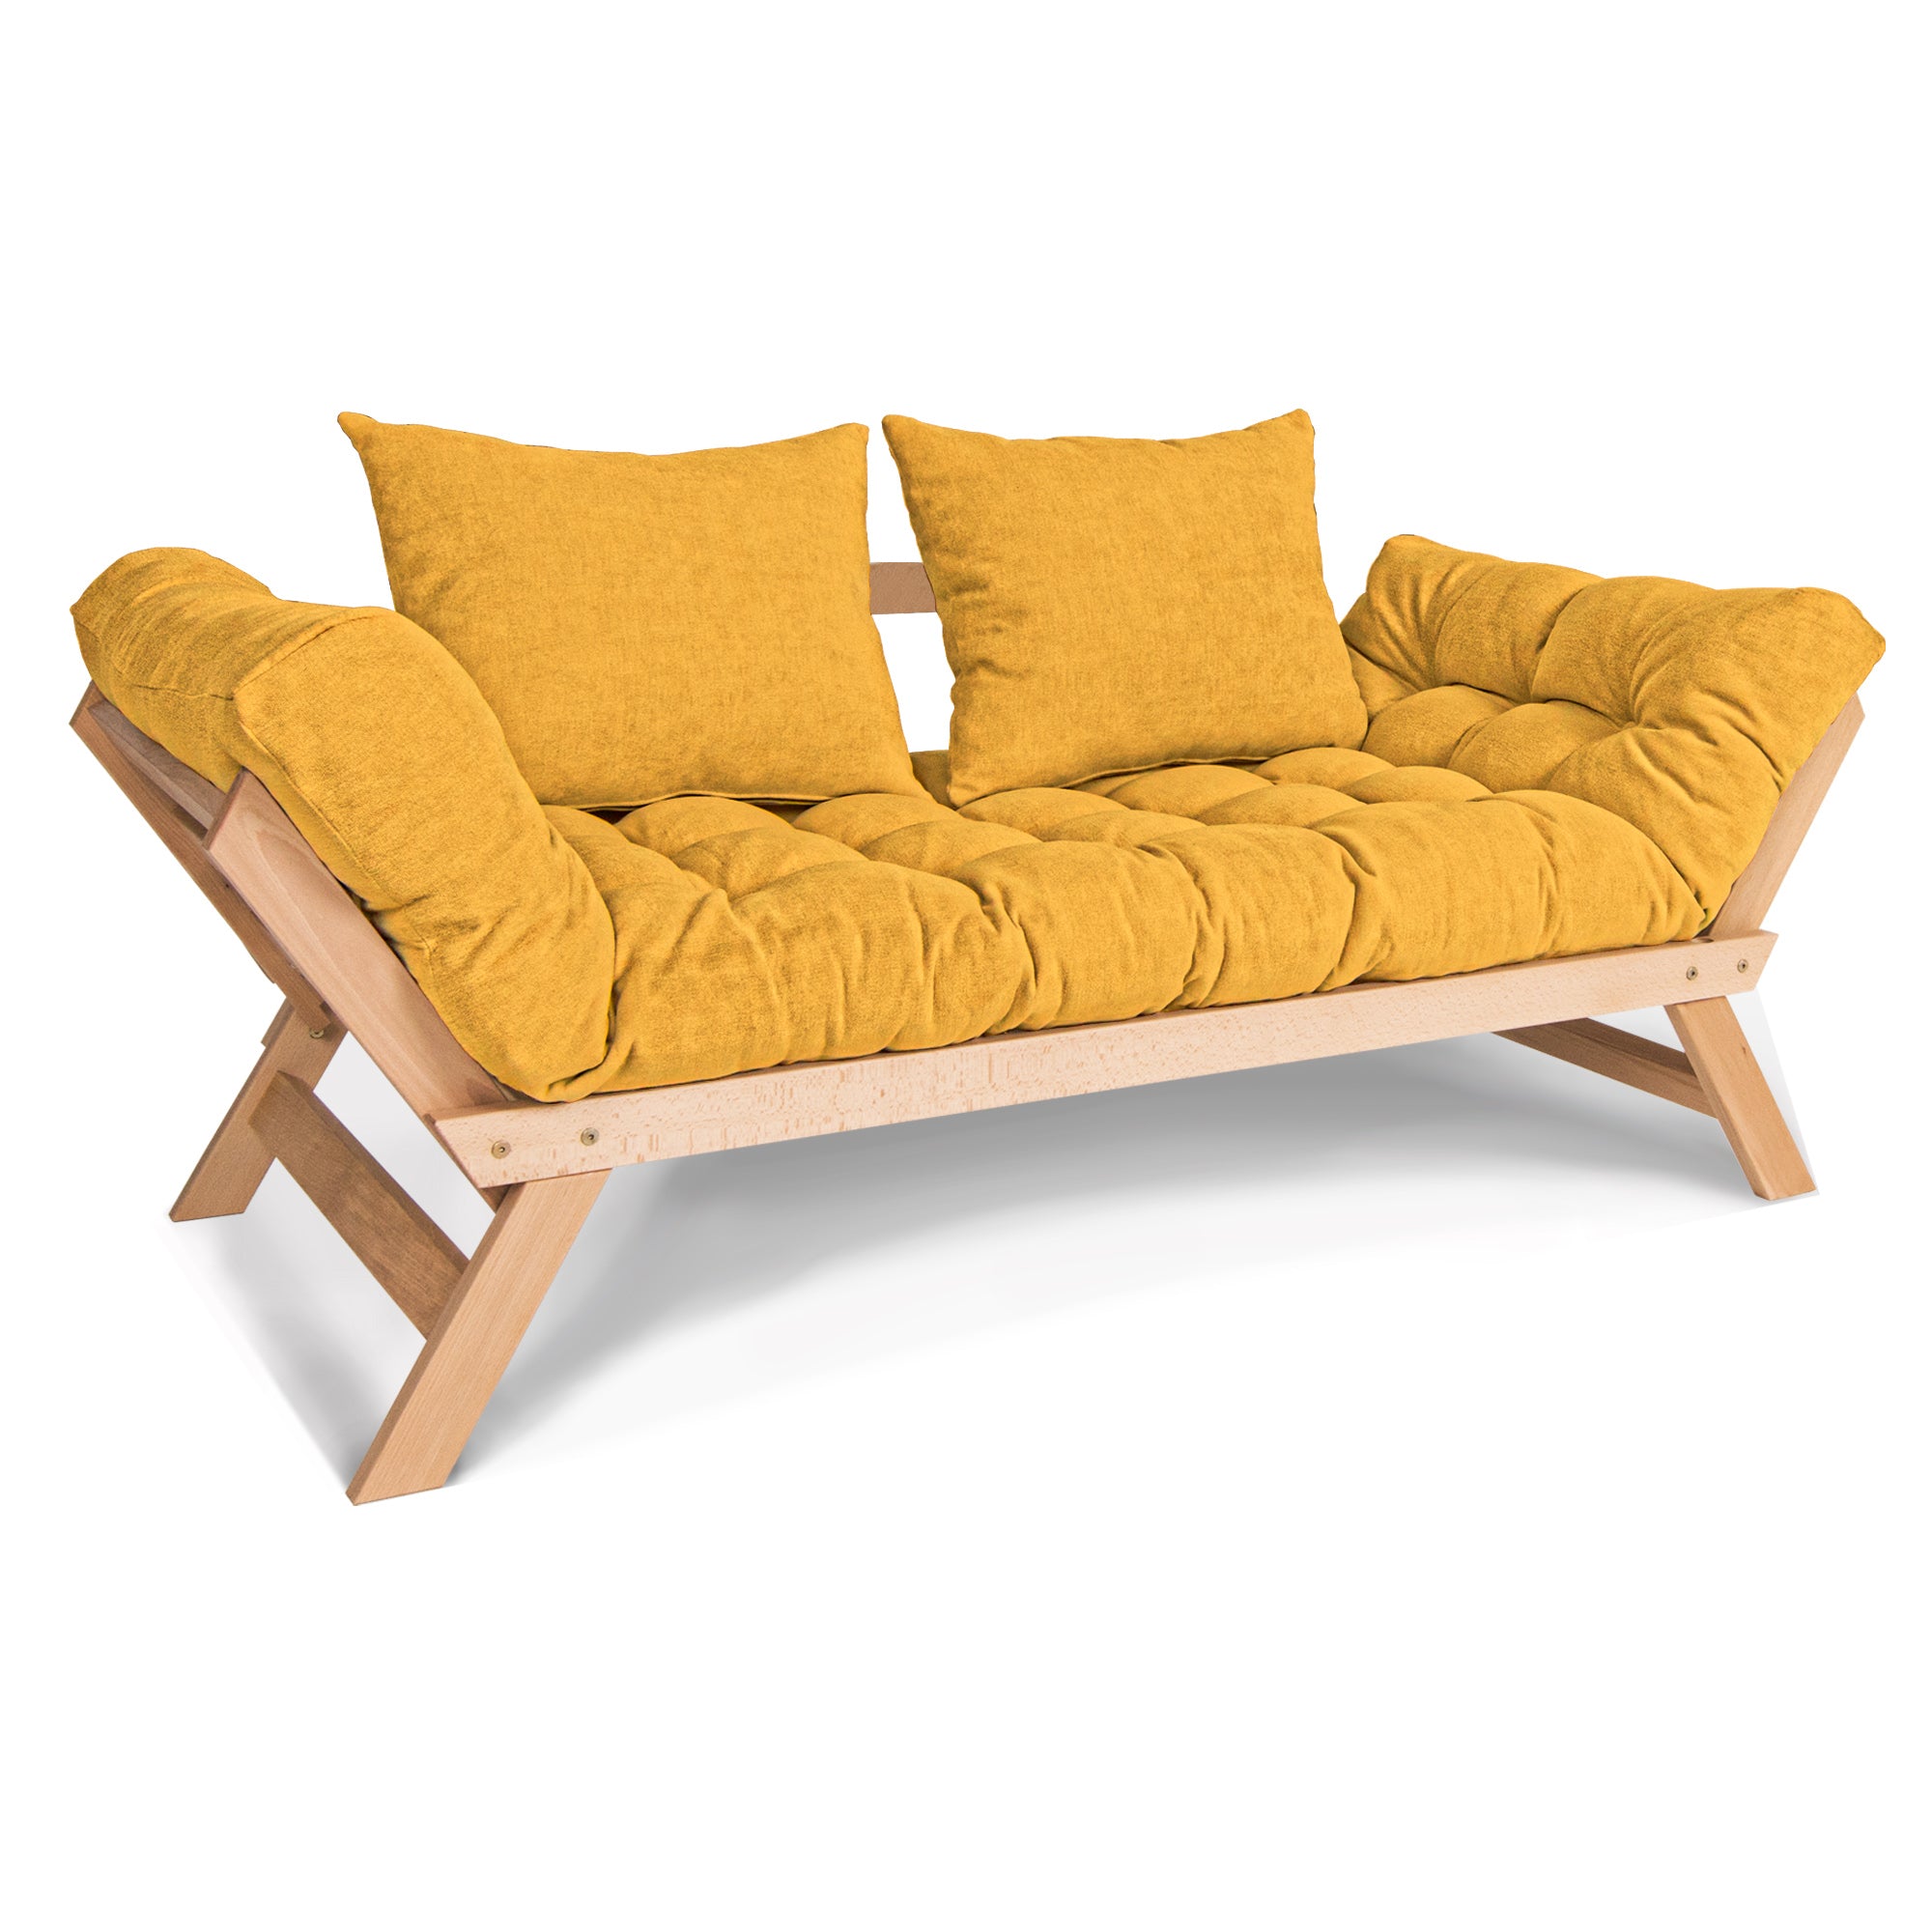 ALLEGRO Folding Sofa Bed, Beech Wood Frame, Natural Colour upholstery colour  yellow